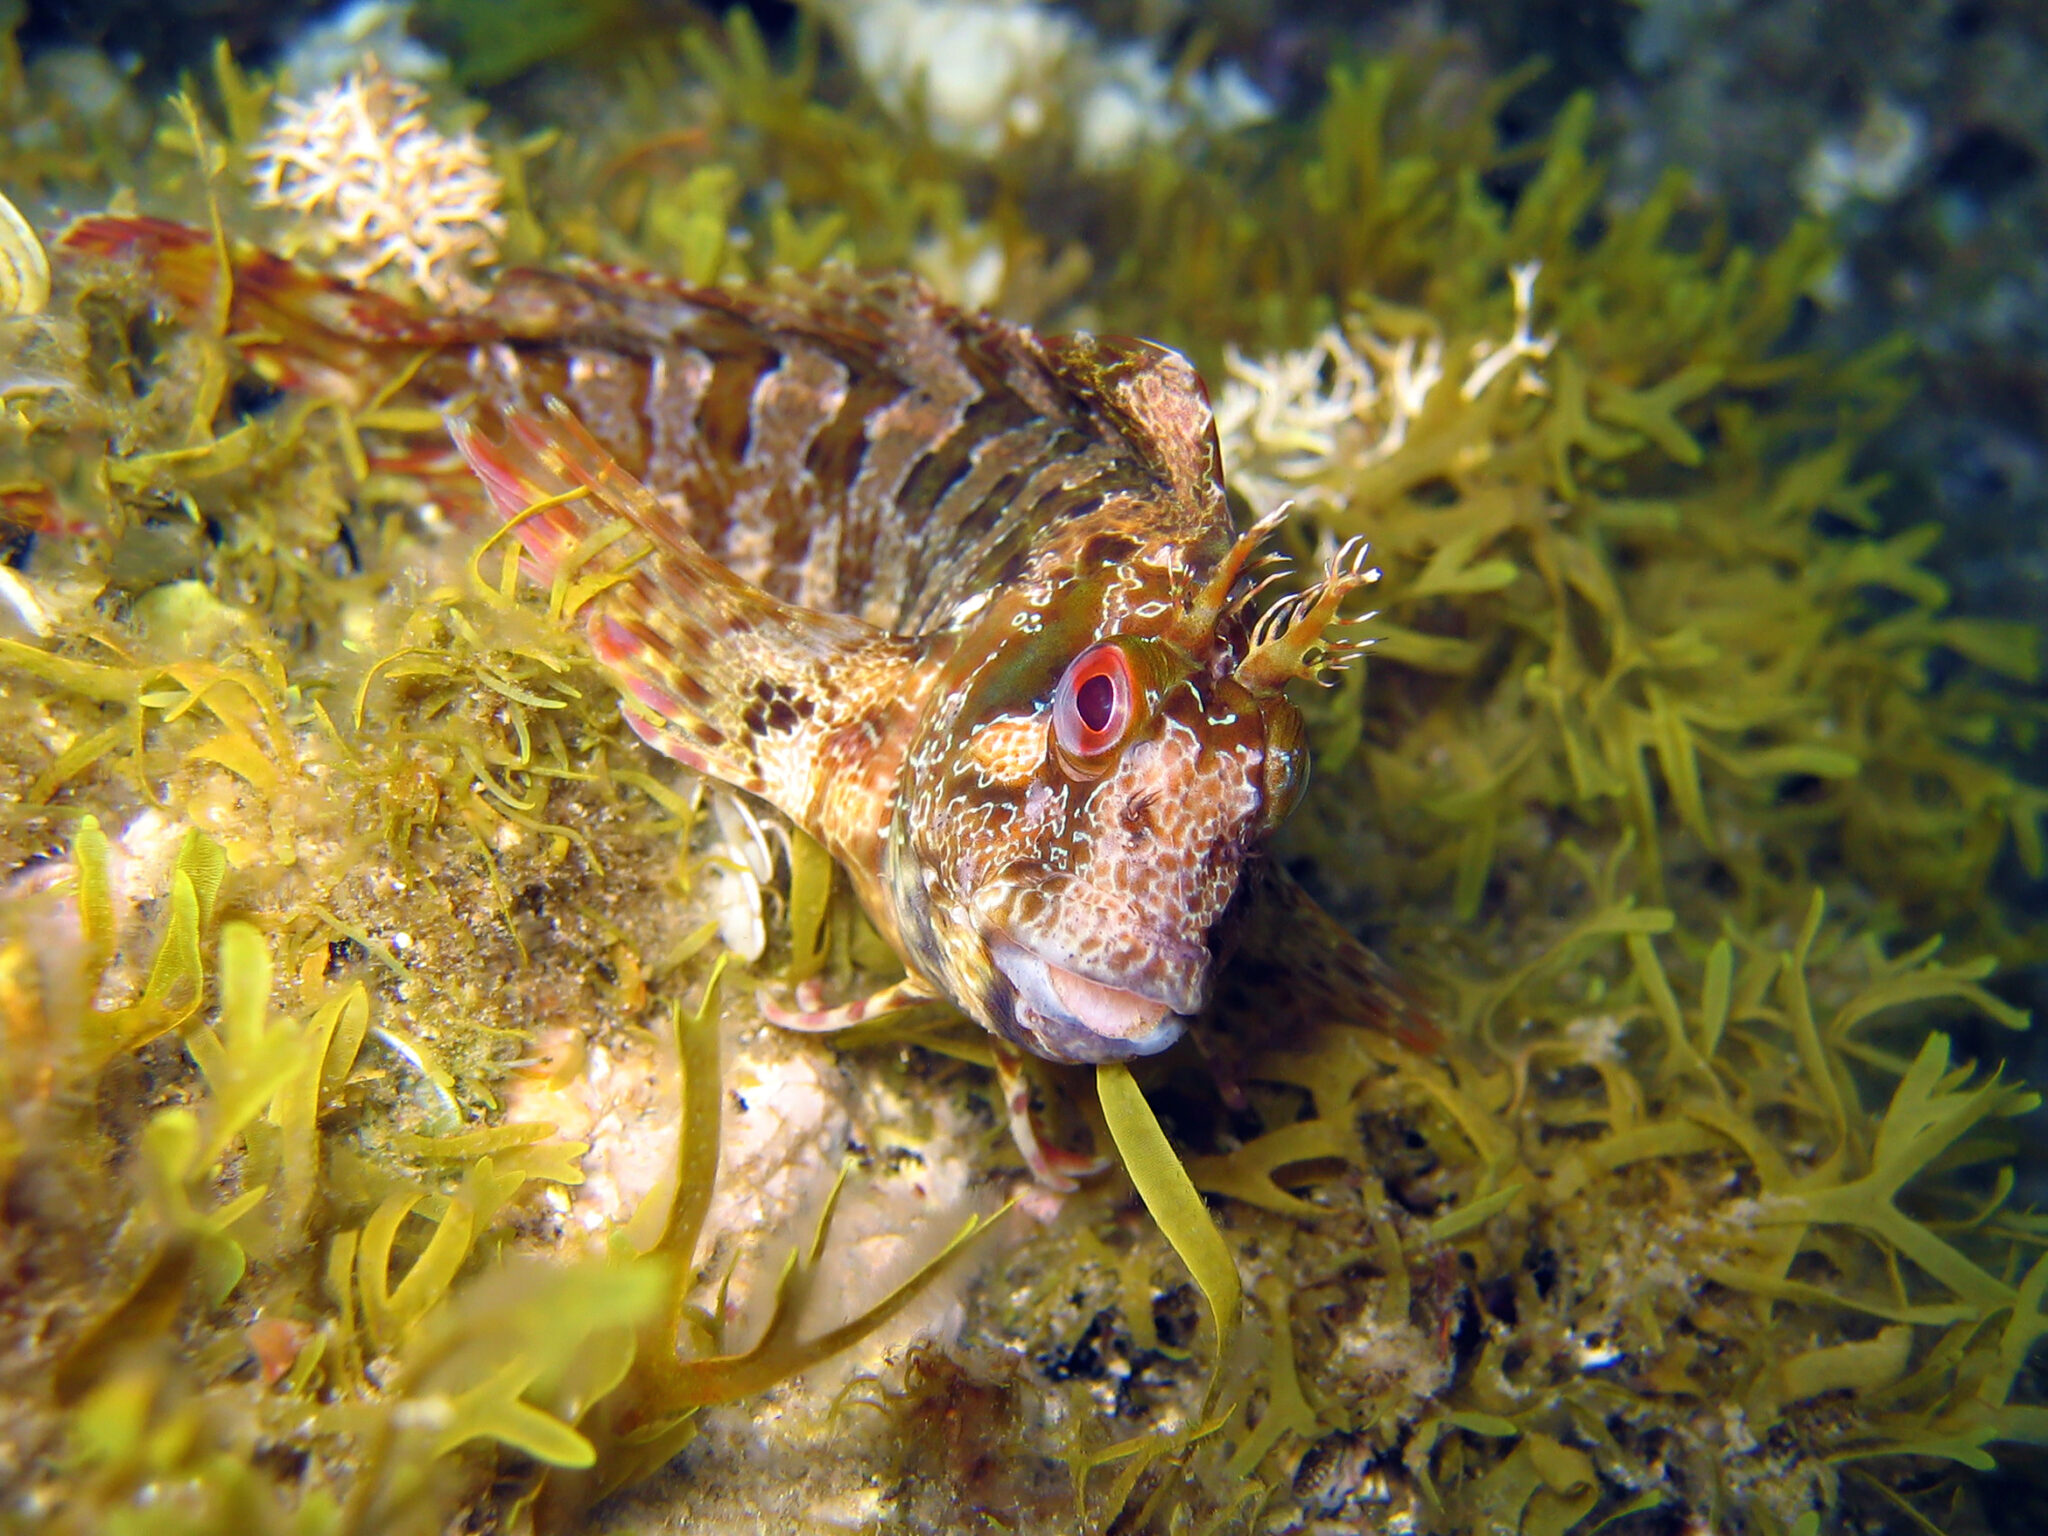 A tompot blenny who is not afraid of divers, making these interesting critters a top subject for photographers or researchers